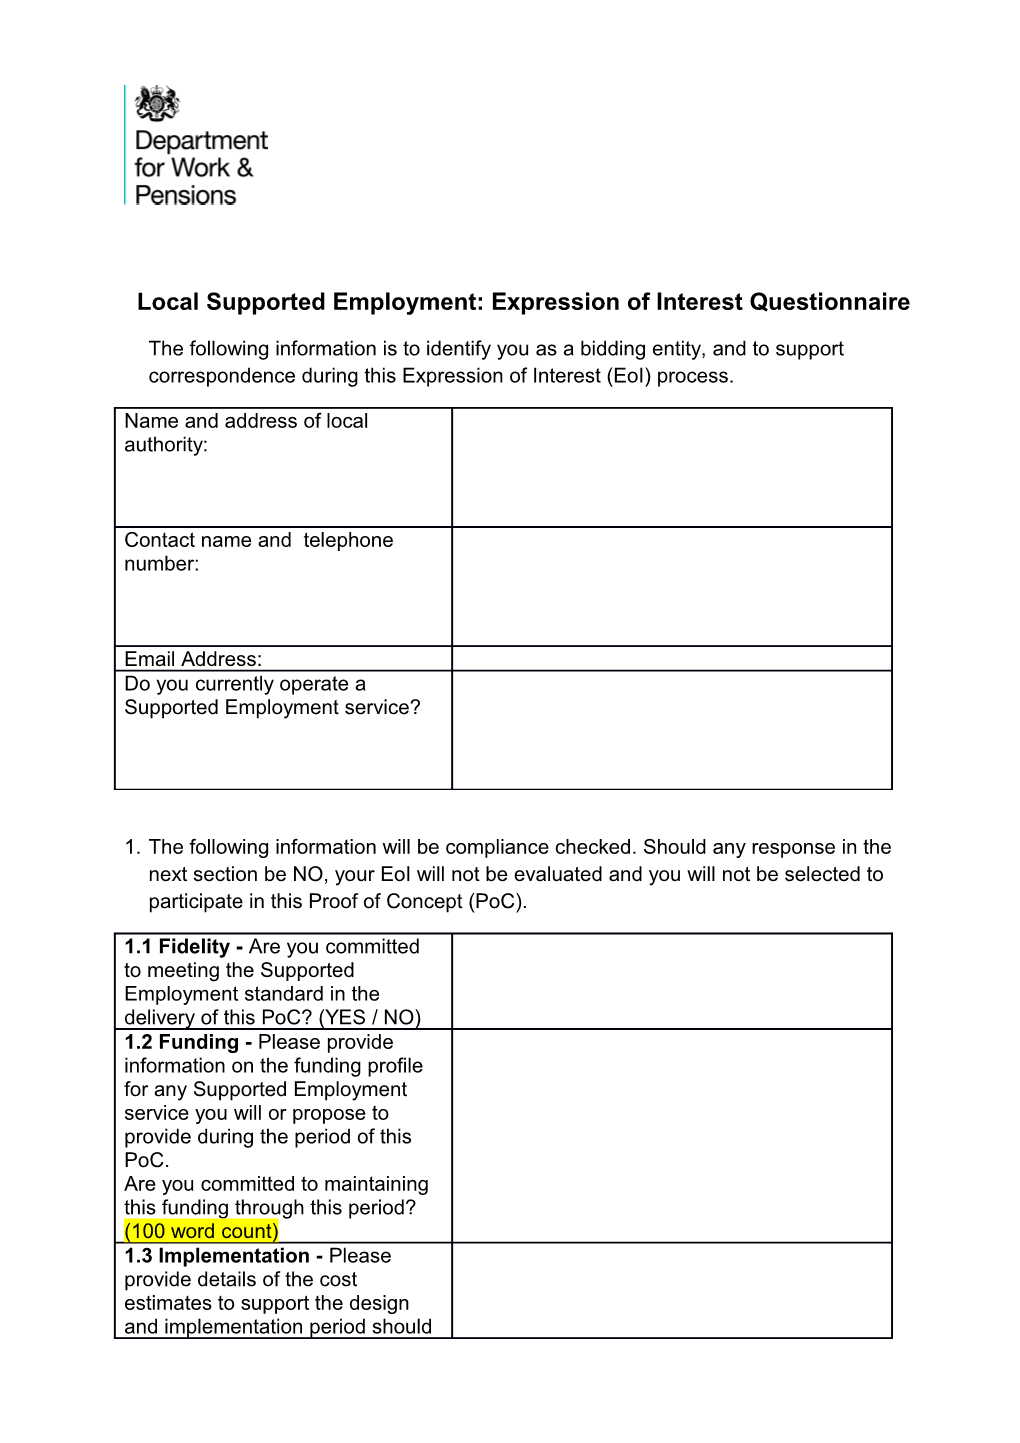 Local Supported Employment: Expression of Interest Questionnaire